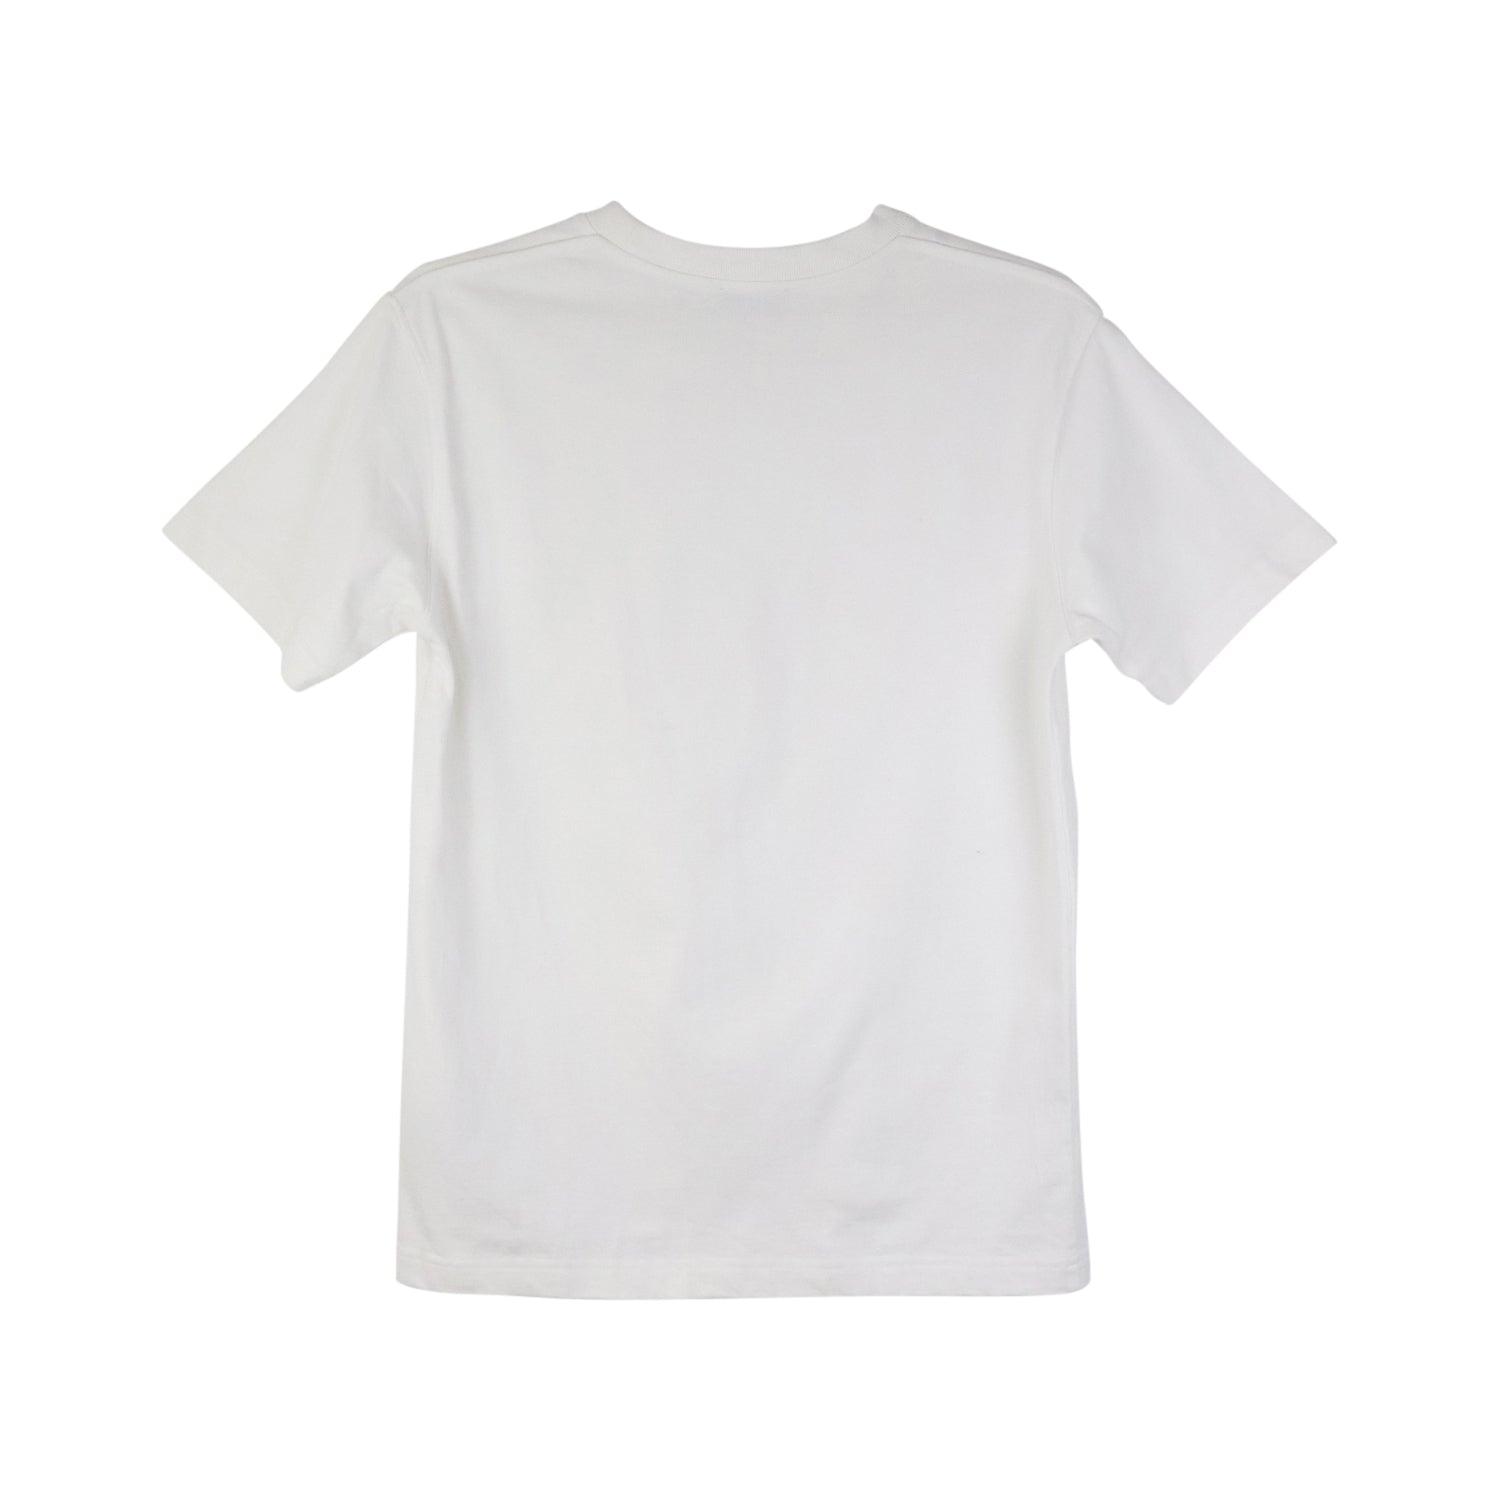 Christian Dior T-Shirt - Men's S - Fashionably Yours